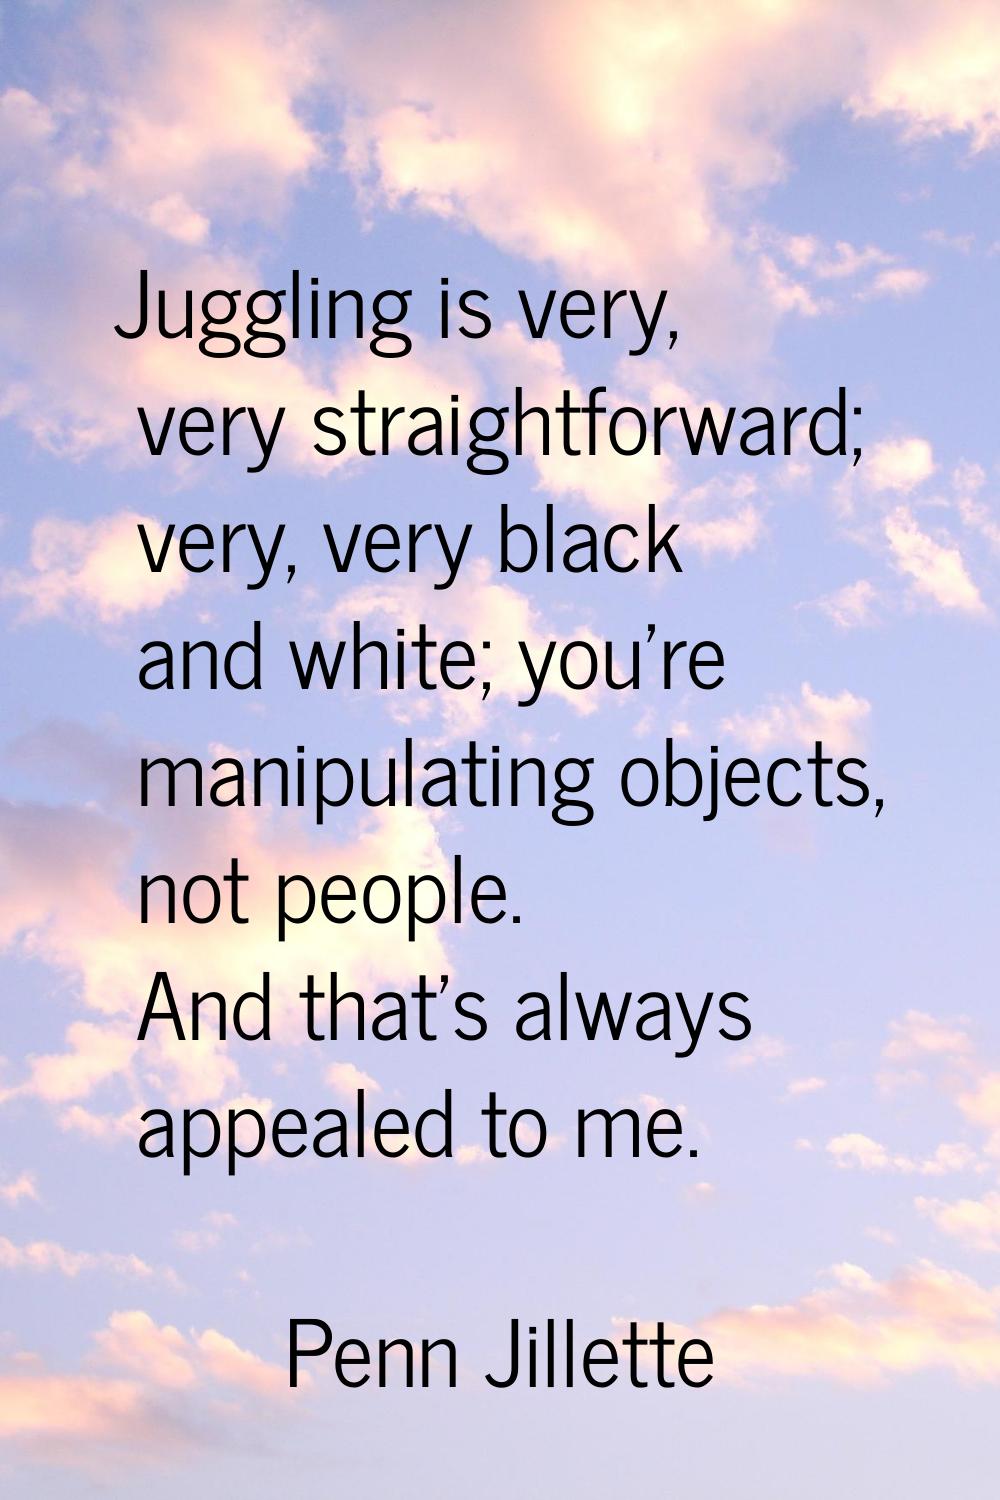 Juggling is very, very straightforward; very, very black and white; you're manipulating objects, no